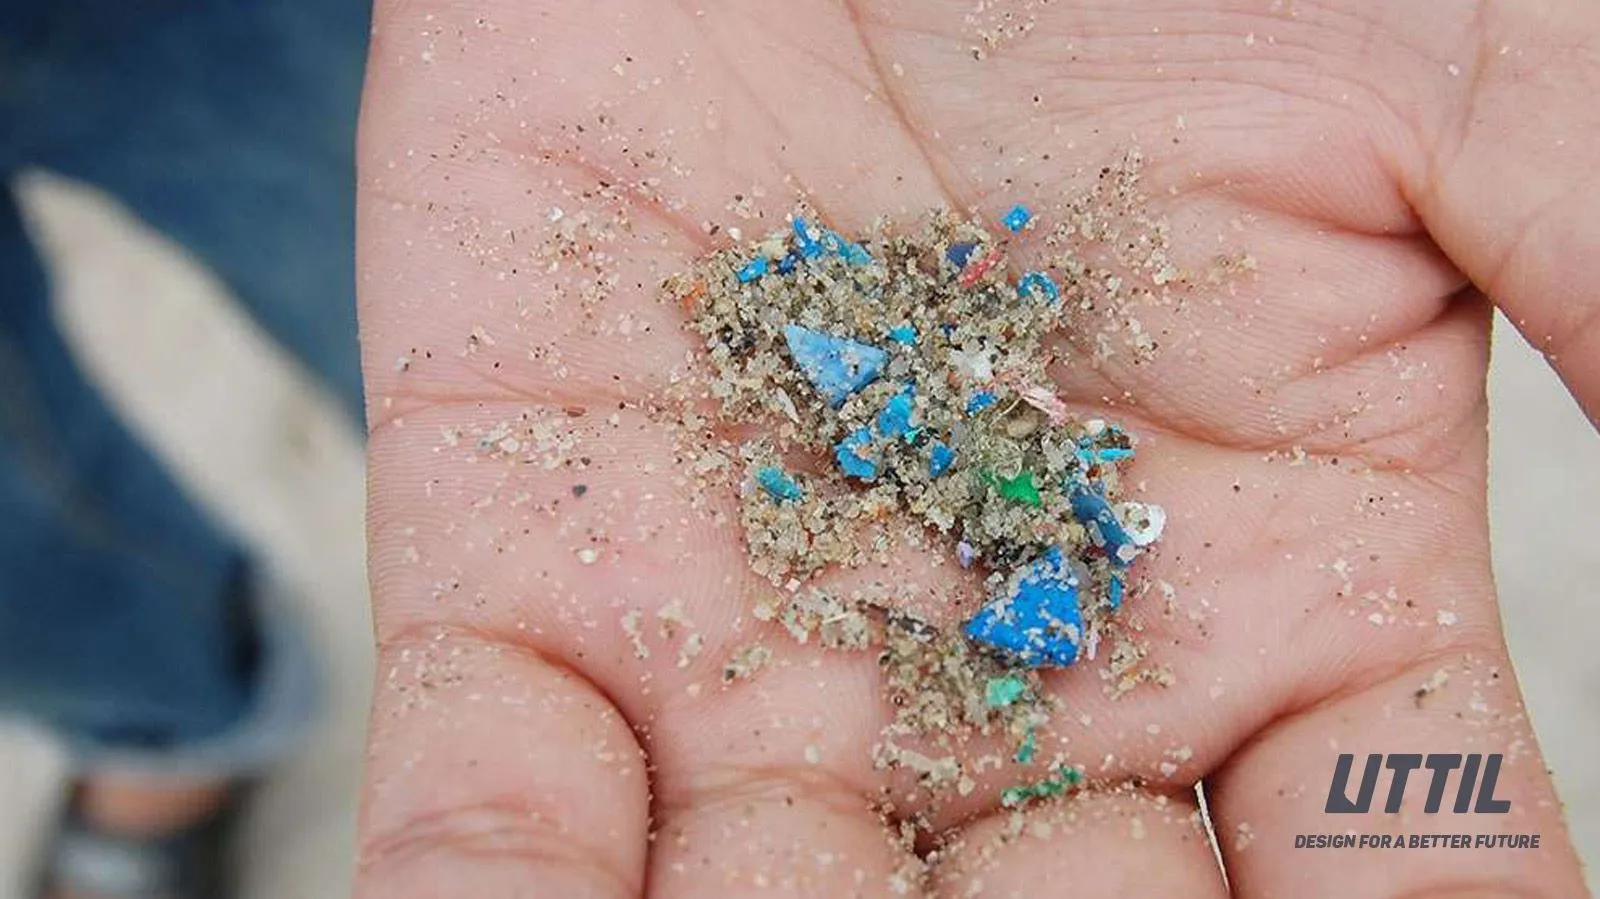 Microplastics: Everywhere & Invisible